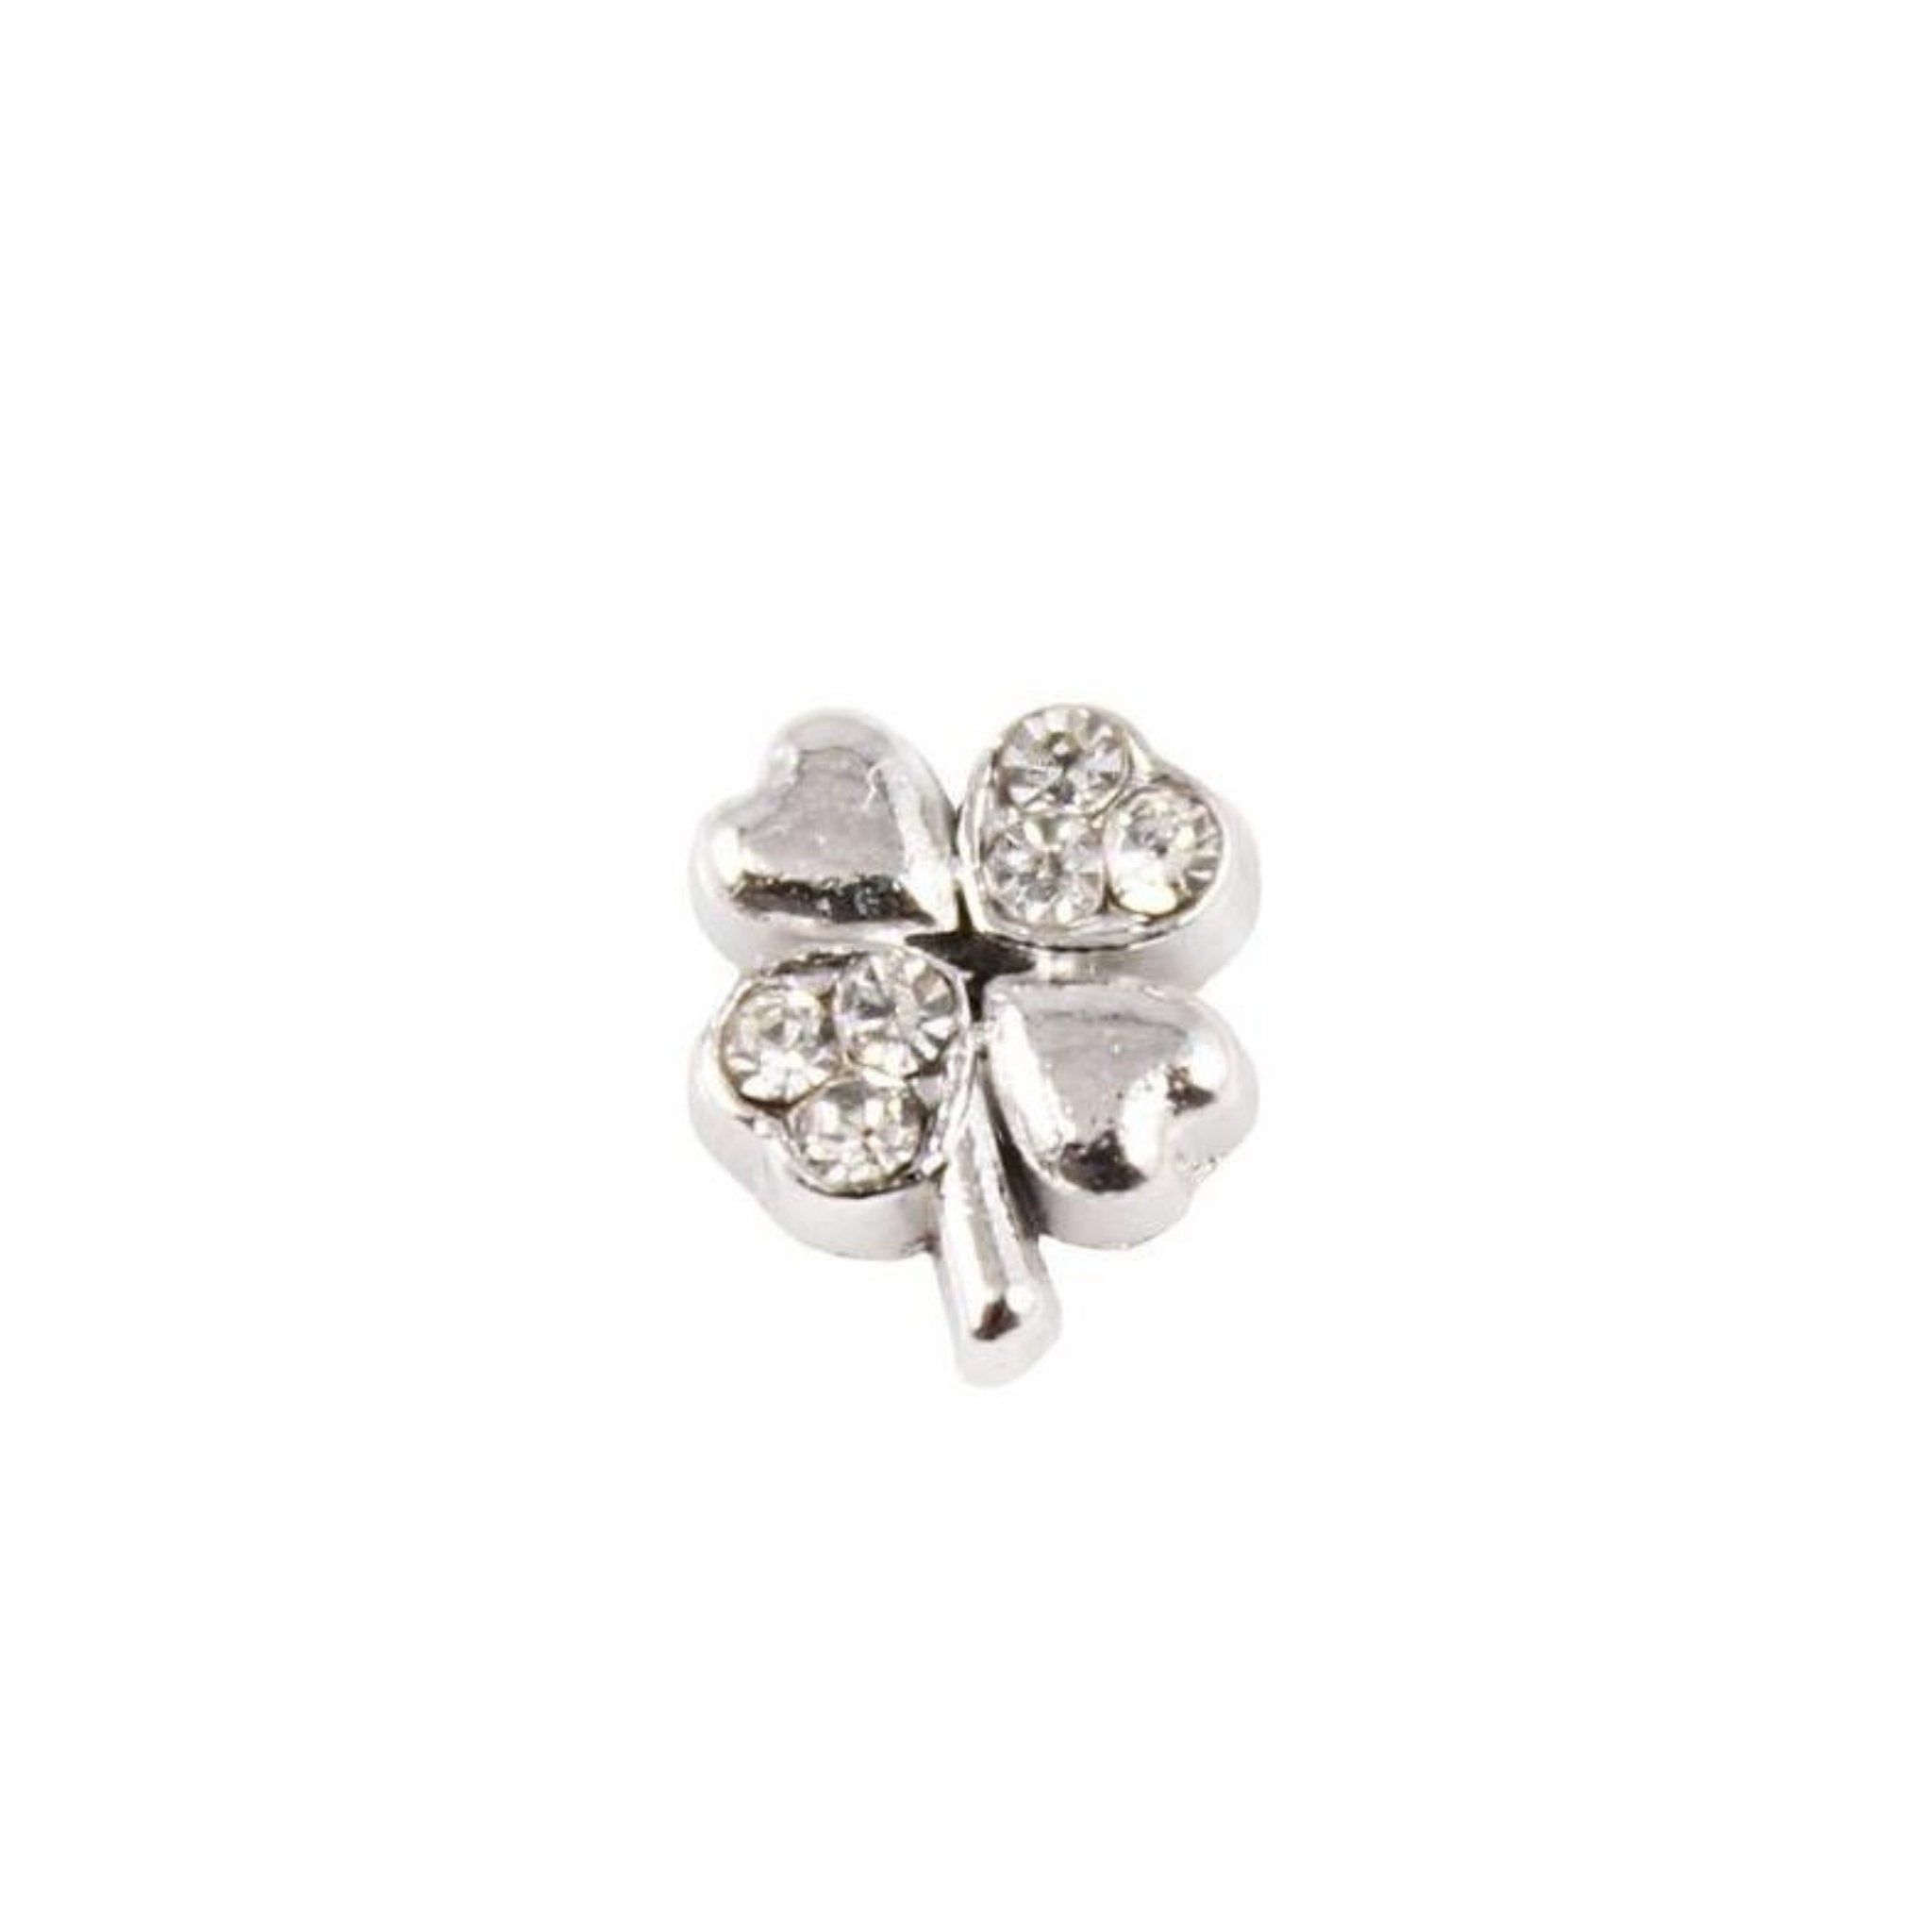 Memory Locket Charm - Lucky clover silver